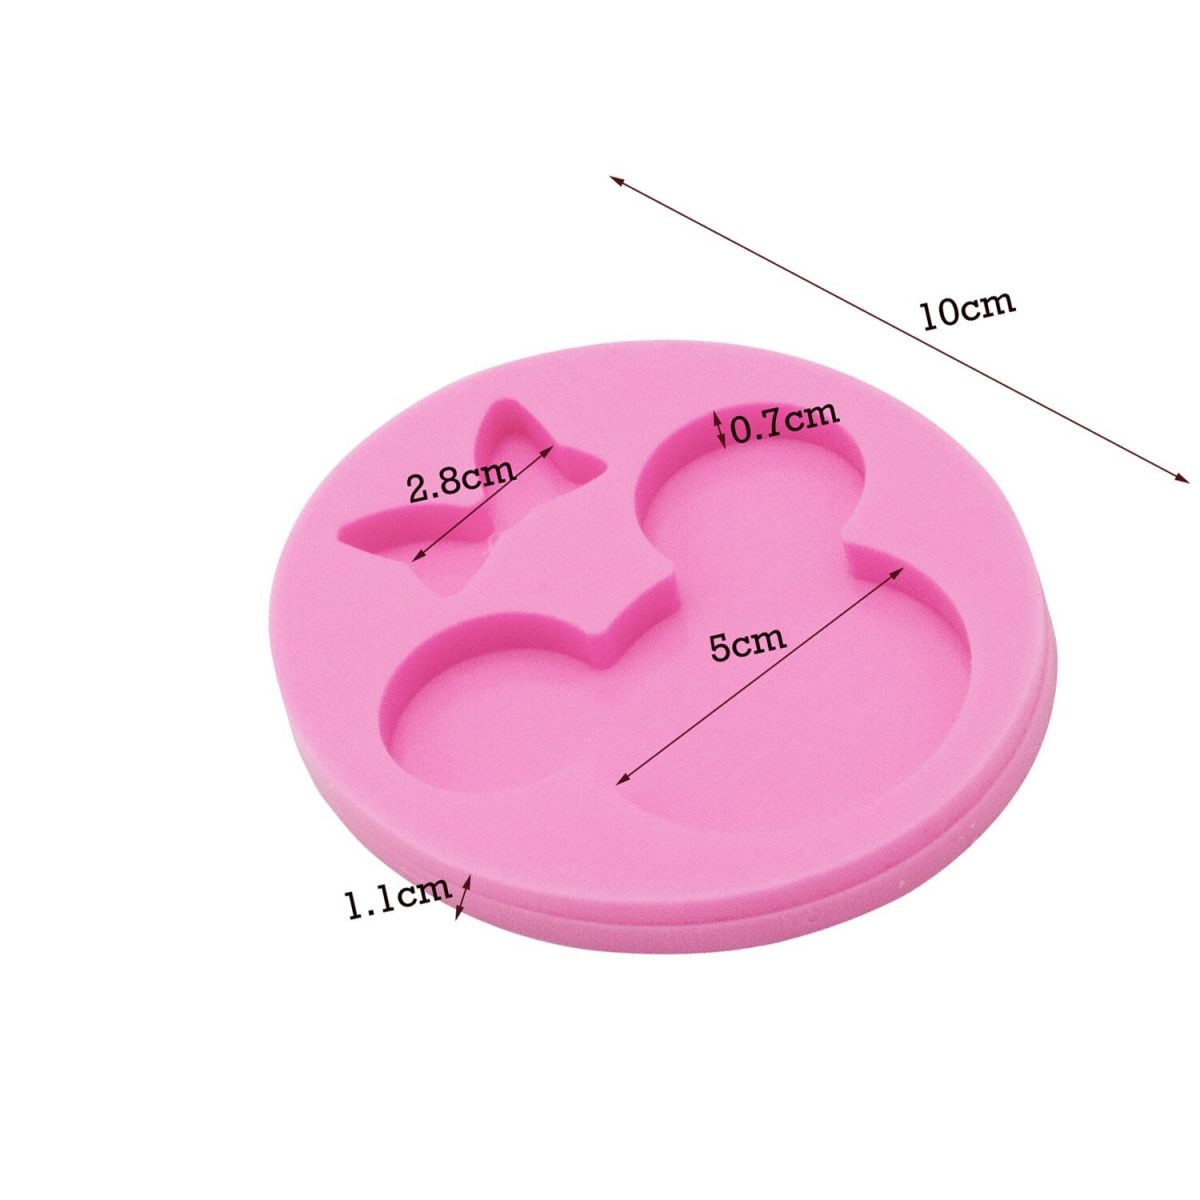 mouse-bow-silicone-mold-157196-inches--cake-decorating-mold-resin-gumpaste-fondant-sugar-craft-mold